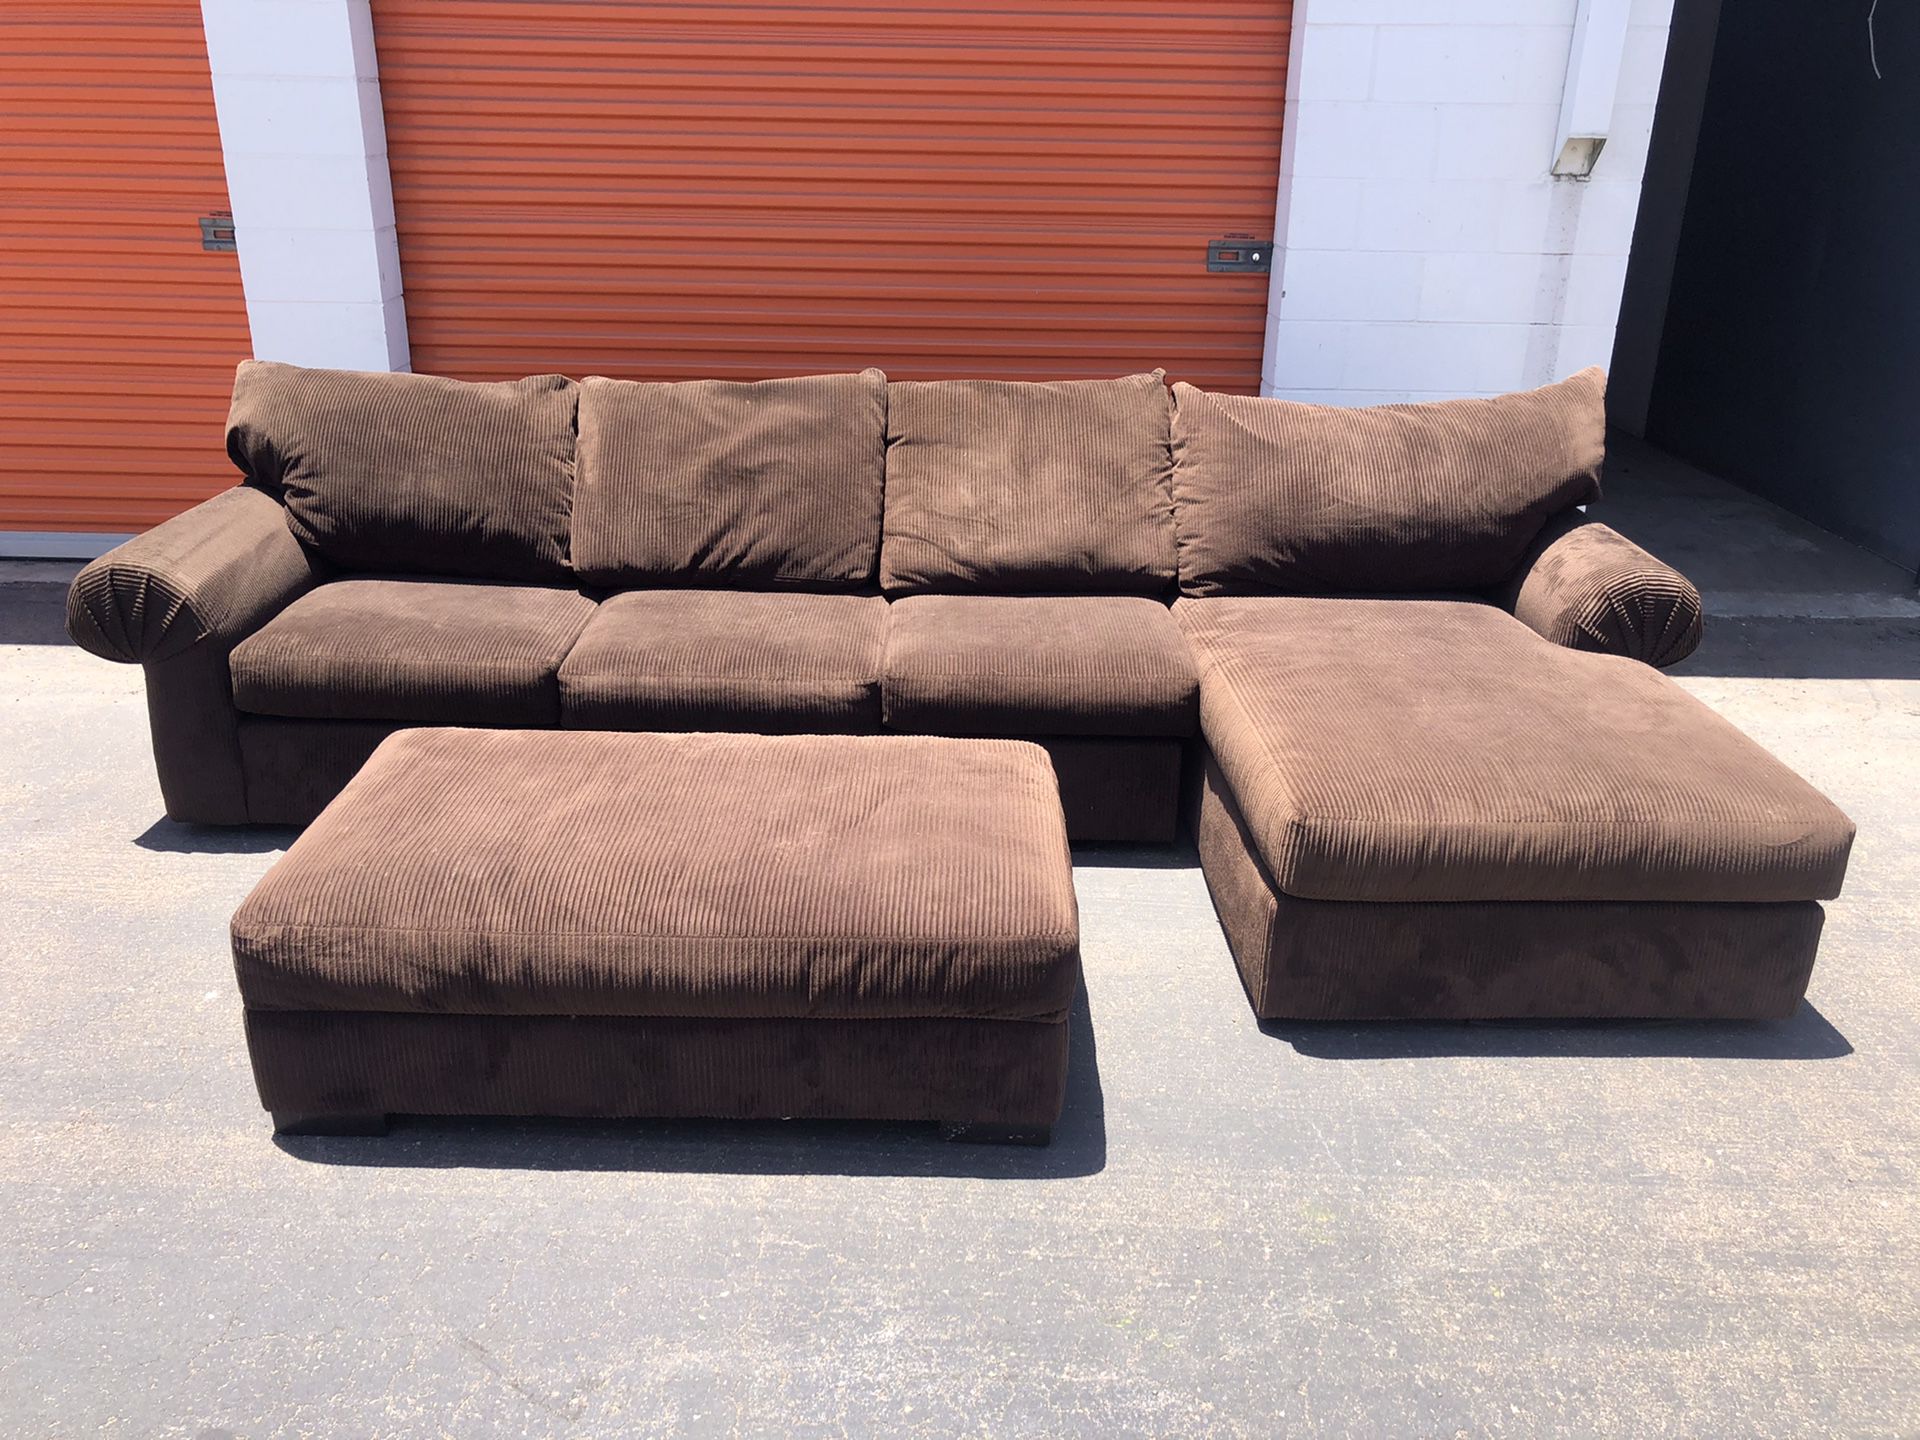 Brown Microfiber Sectional Couch w/storage ottoman -I can deliver